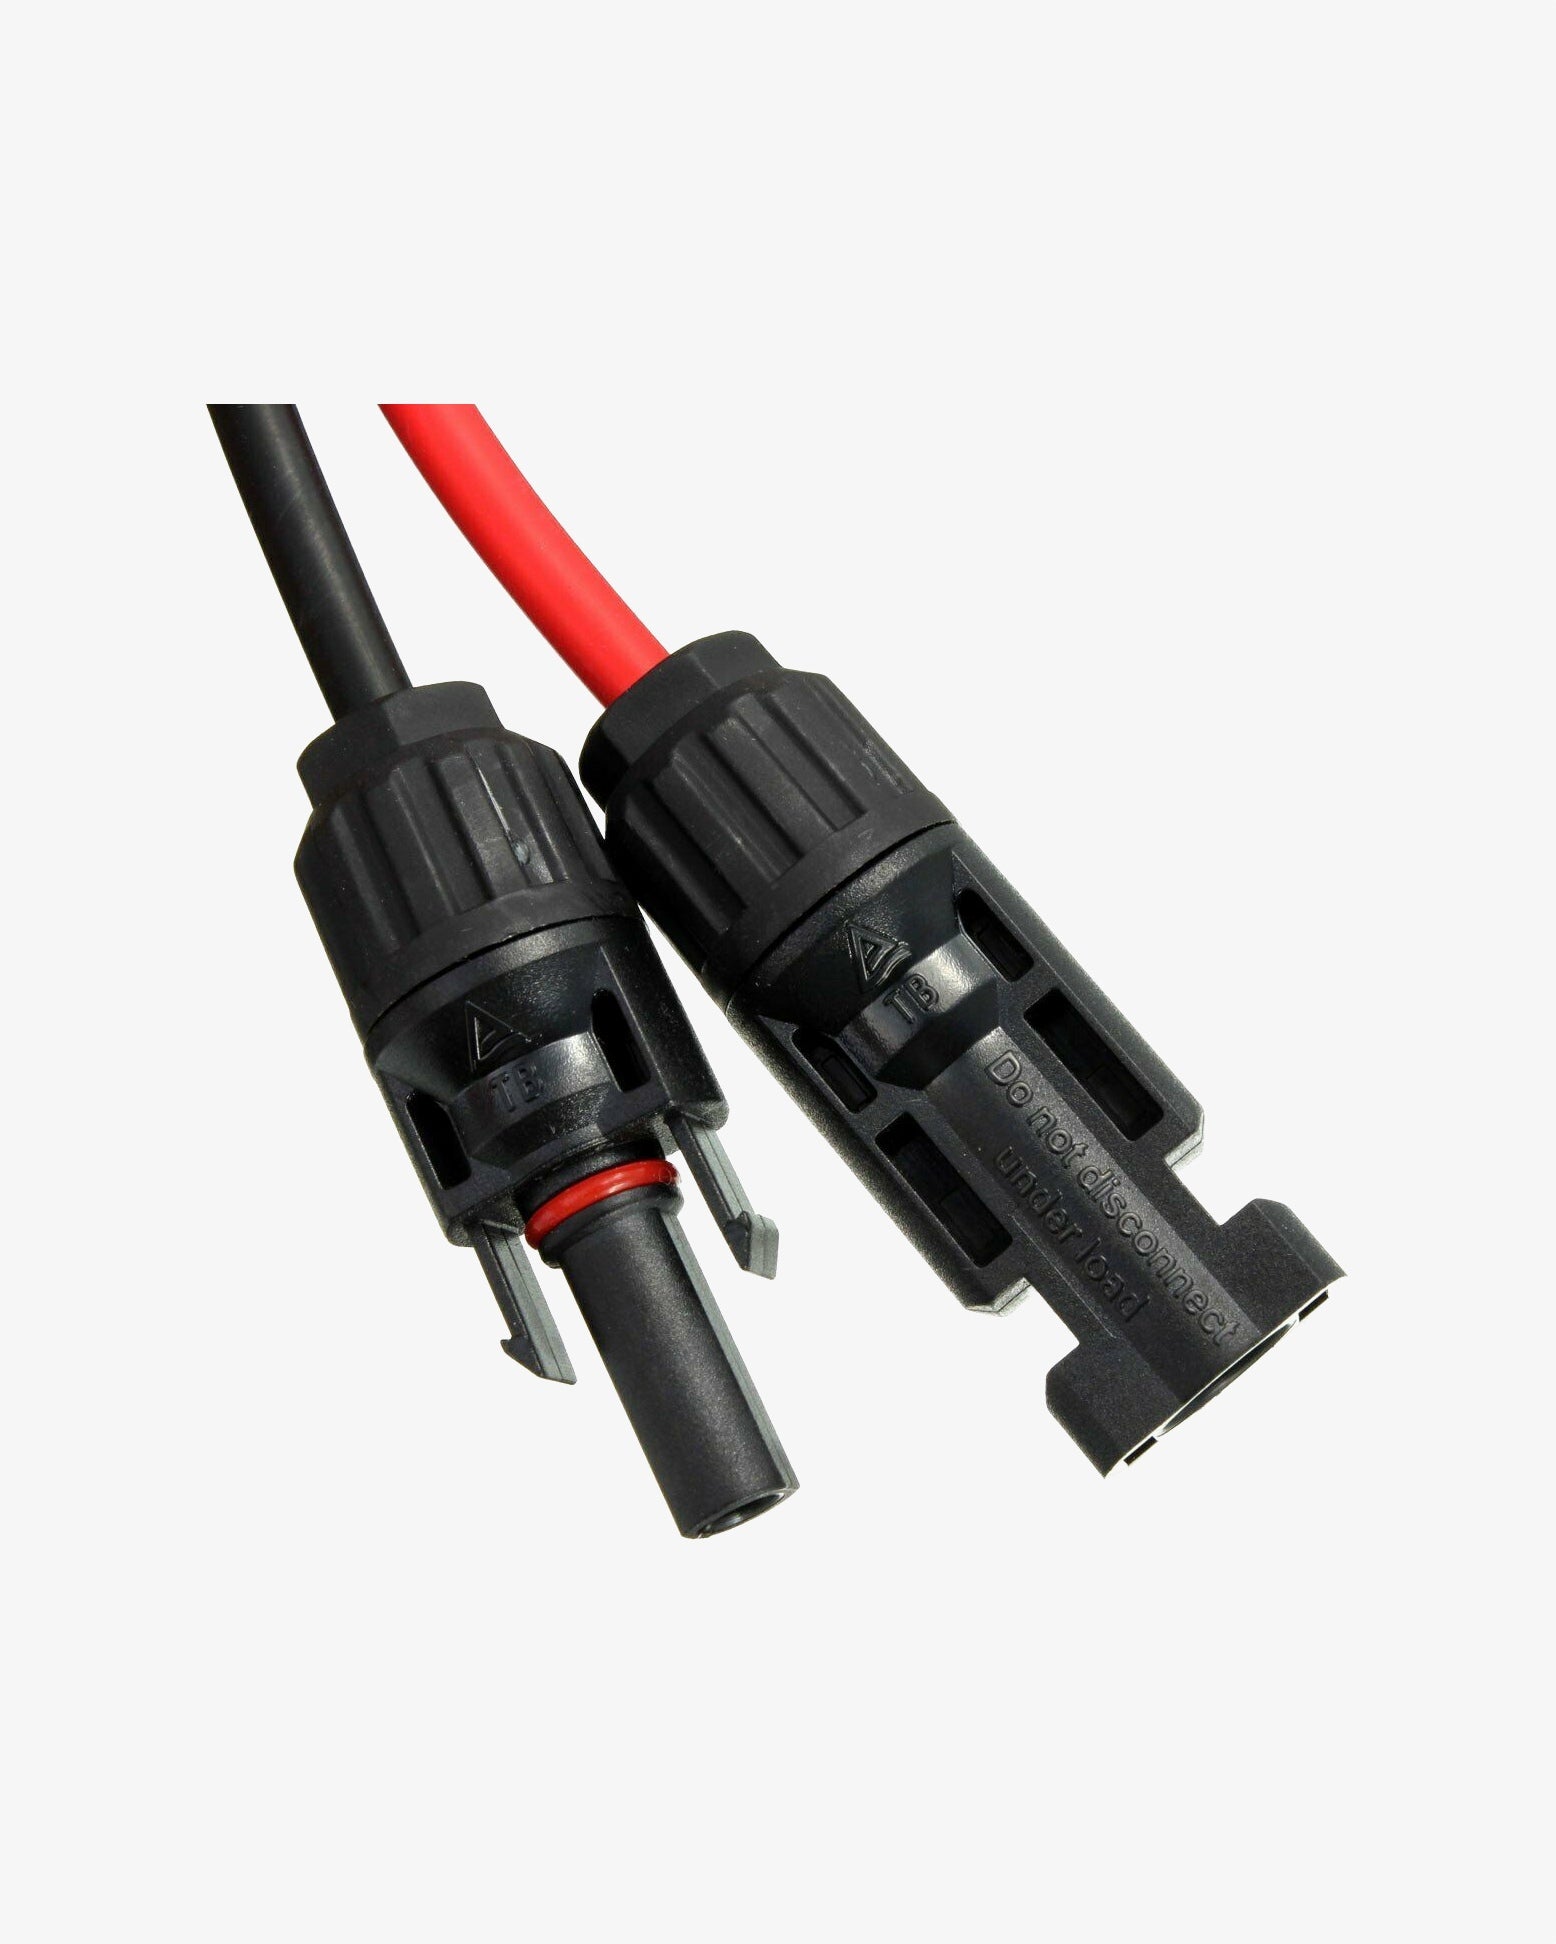 One Pair (Black & Red), 20 ft. MC4 PV Cable